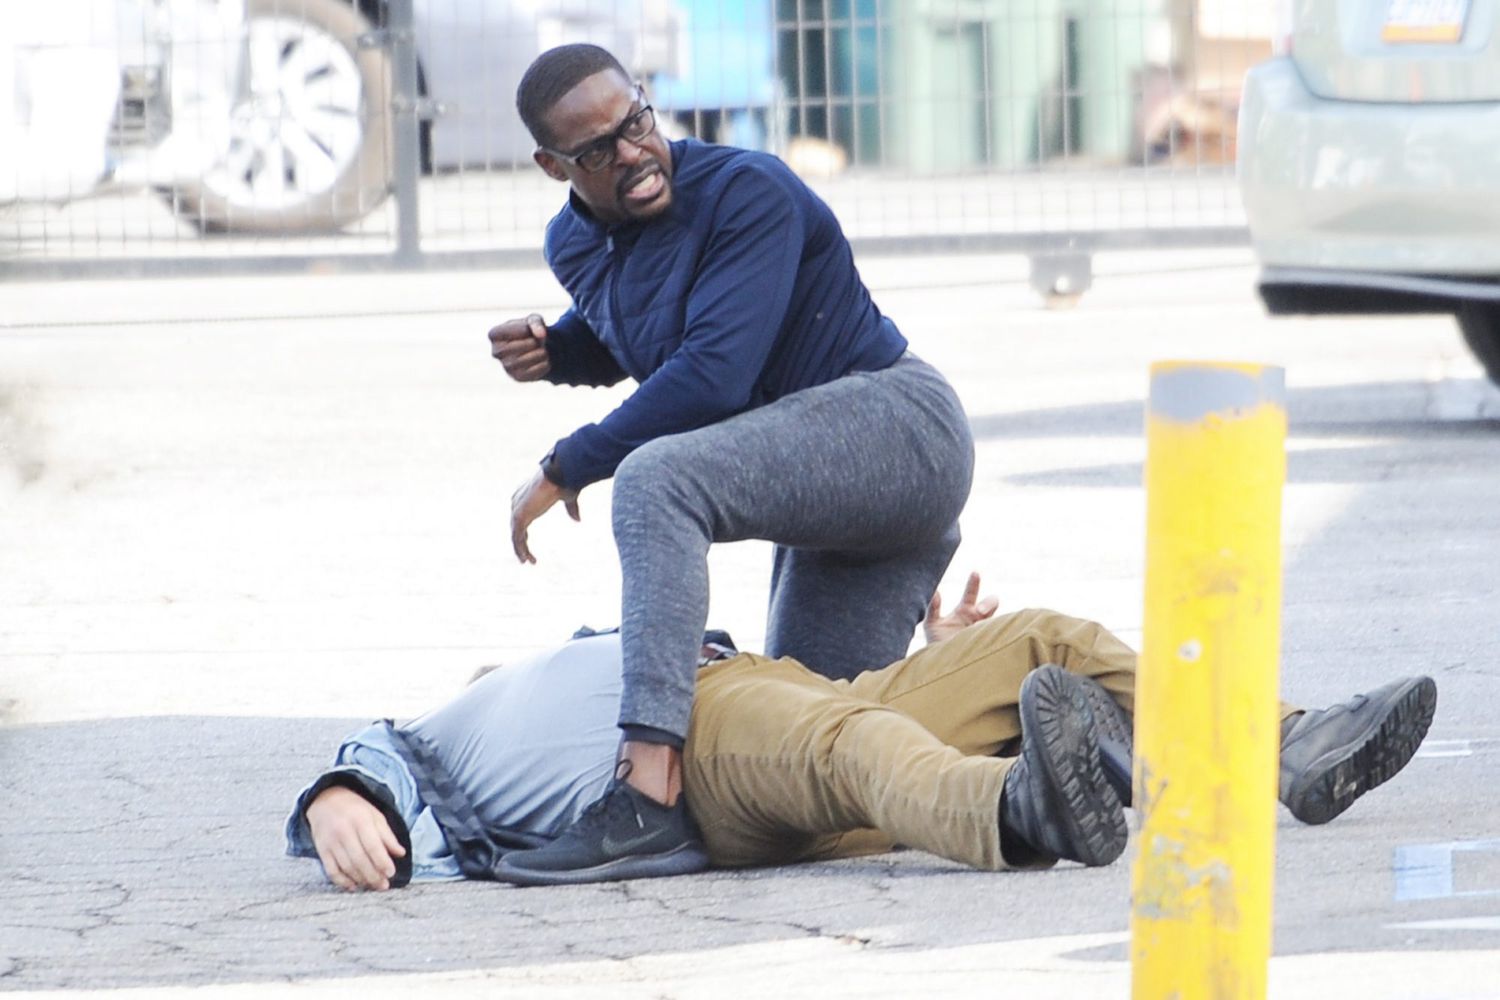 Sterling Brown springs into action as he takes down a perpetrator and saves a woman from being attacked for a scene on the set of "This Is Us" filming in Highland Park, California.